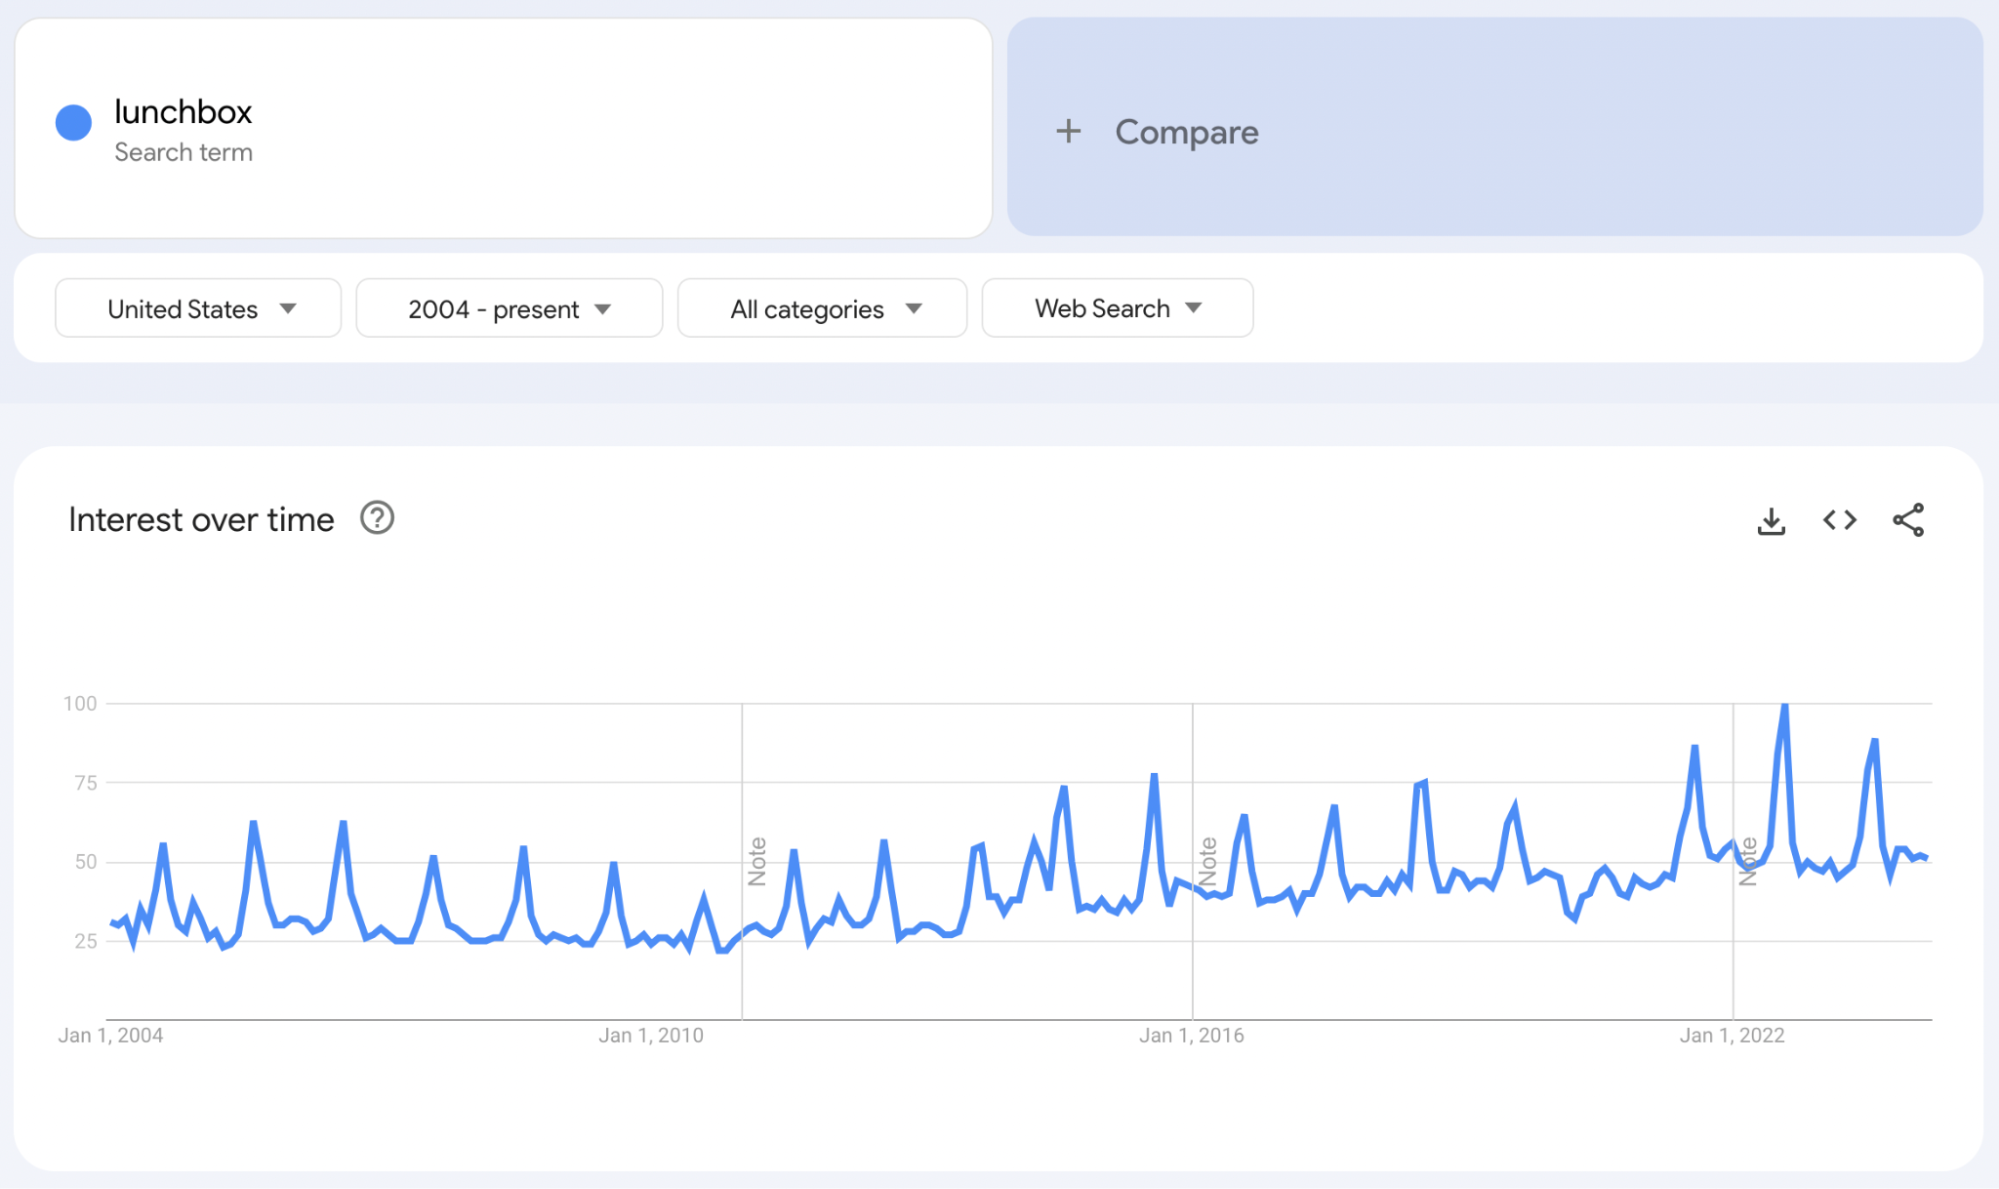 Google Trends report for “lunchbox”.